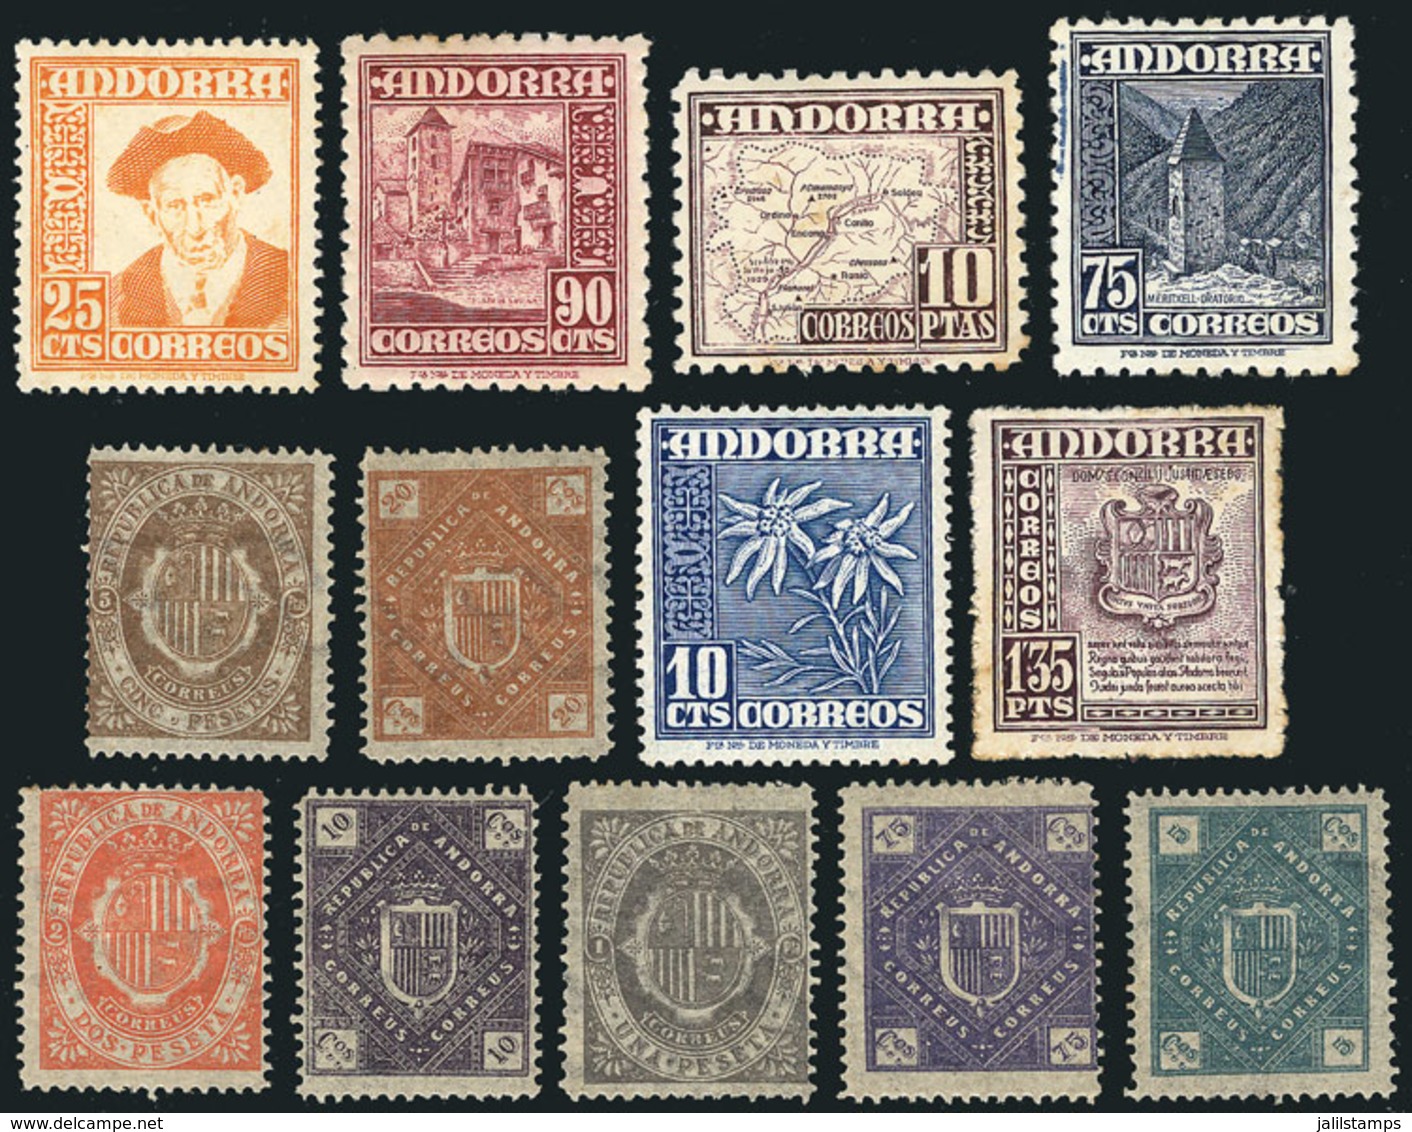 SPANISH ANDORRA: Small But Interesting Lot Of Stamps, Most Of Very Fine Quality! - Sammlungen